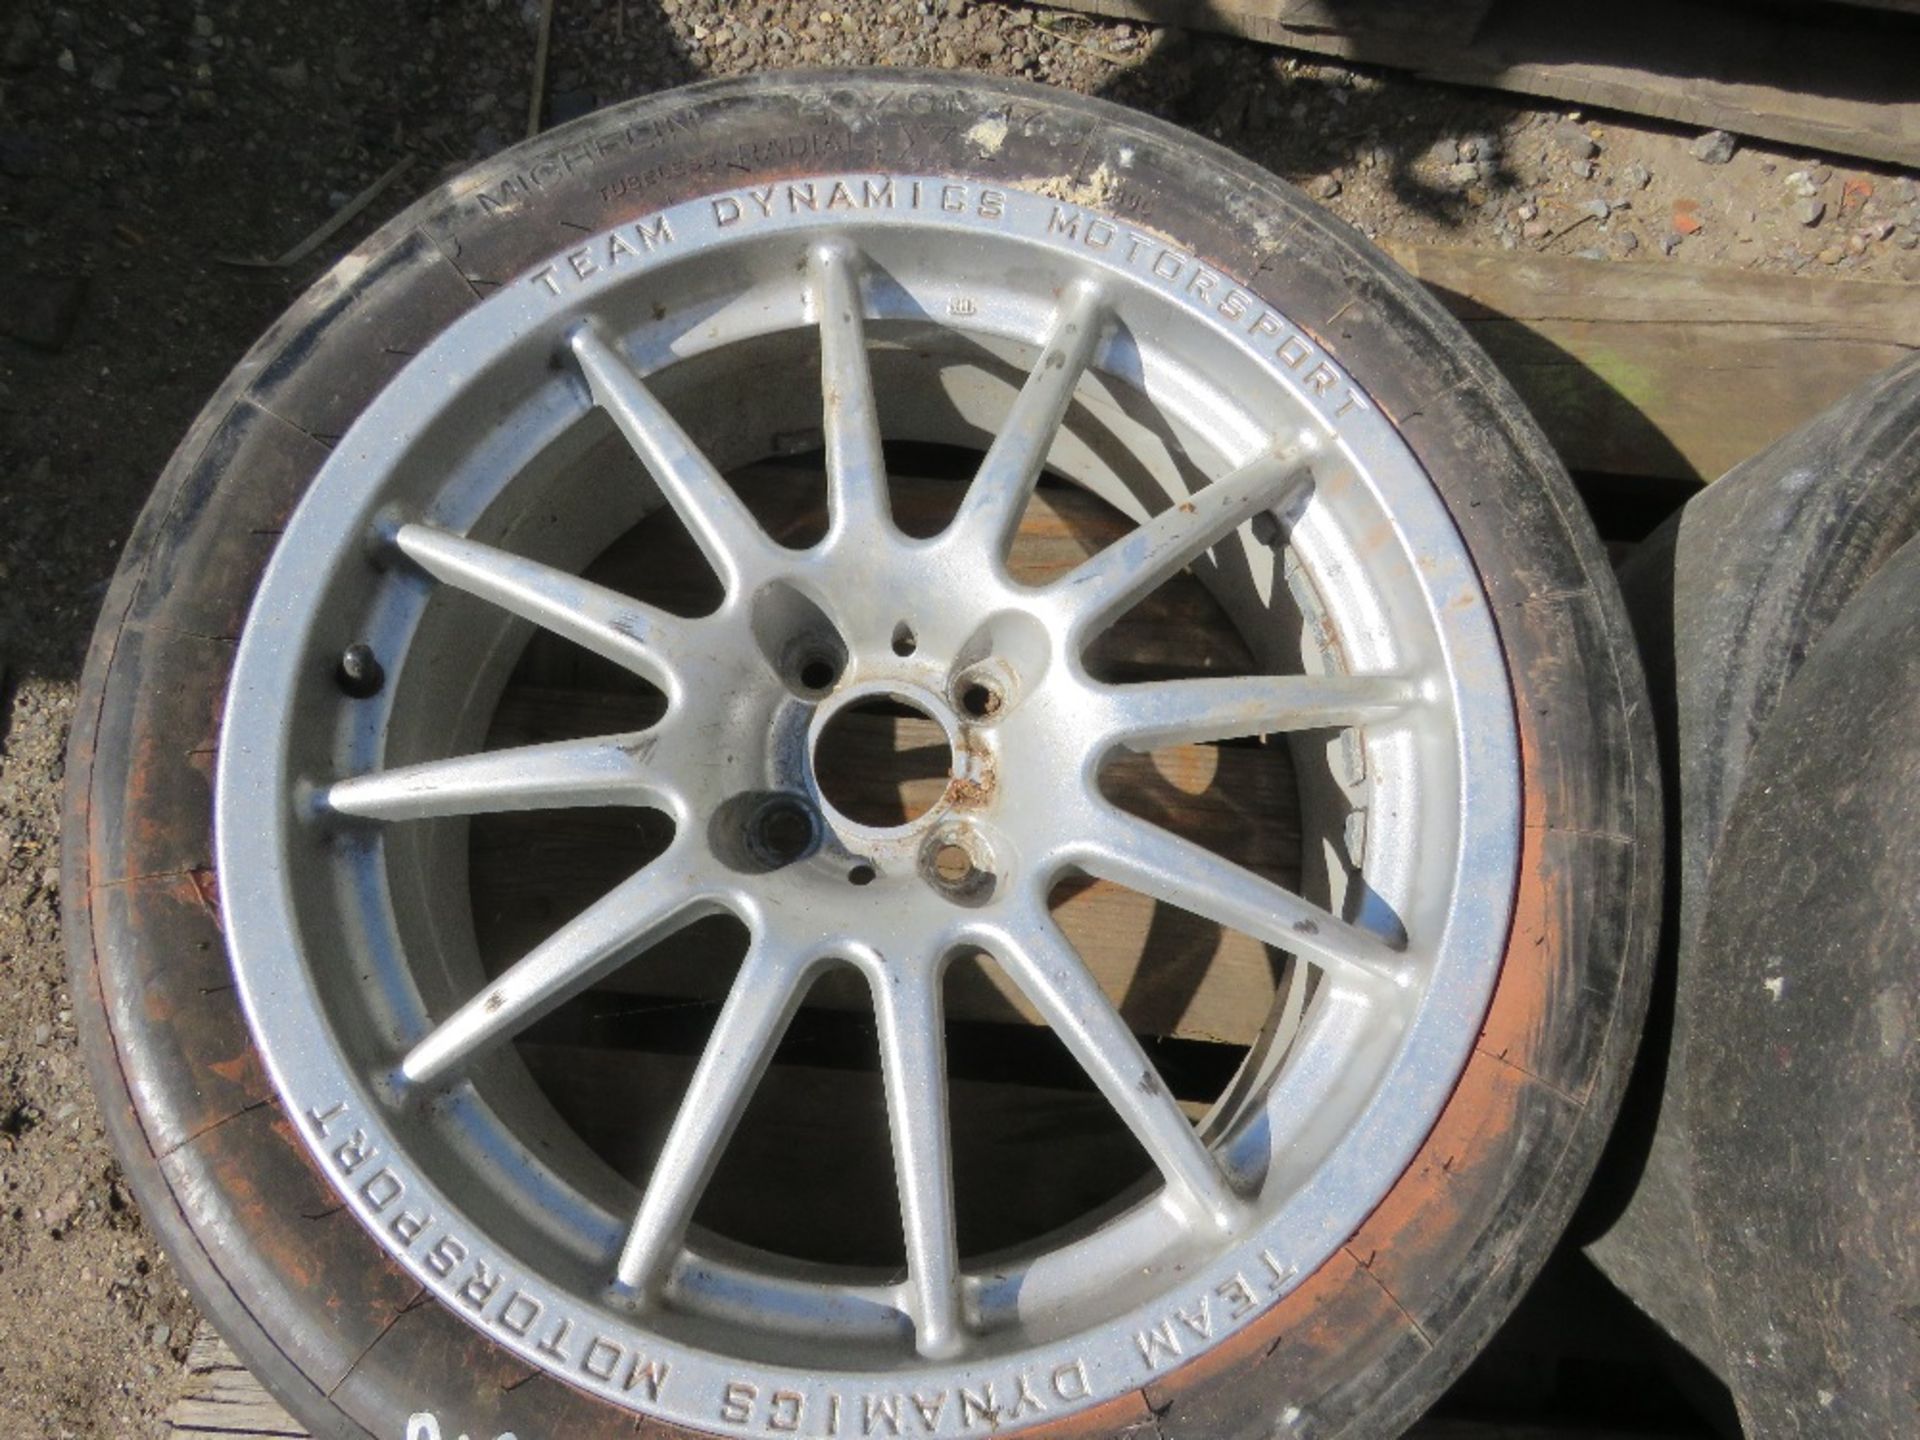 SET OF 4NO TEAM DYNAMICS MOTORSPORT RACING WHEELS AND TYRES, PREVIOUSLY USED ON AN ALFA ROMEO 33 RA - Image 7 of 8